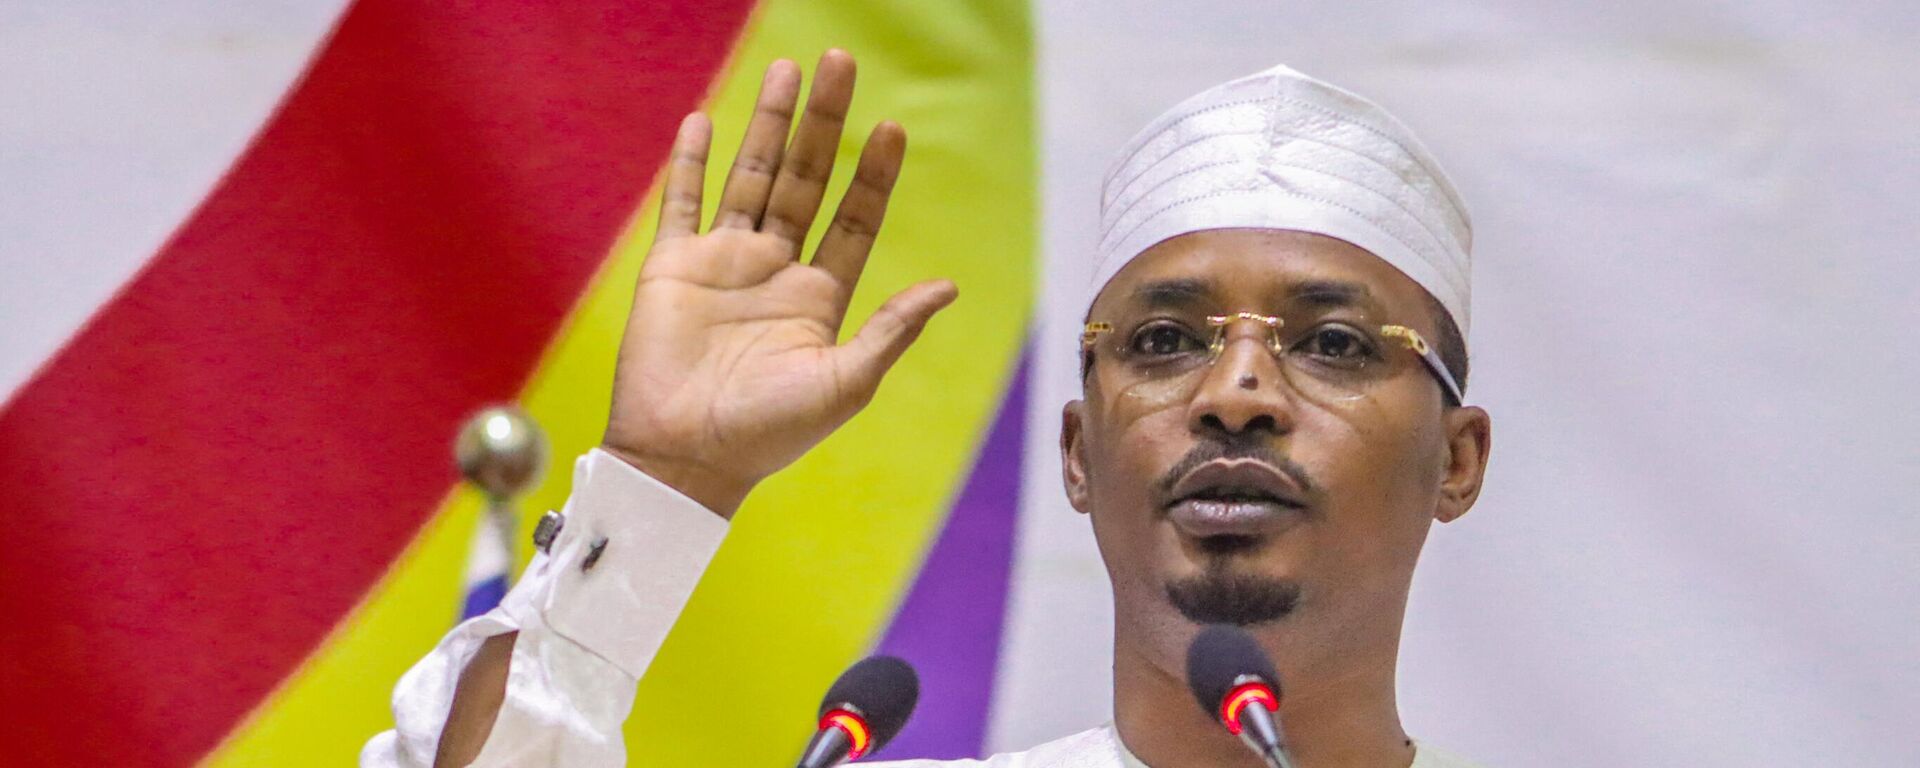 Mahamat Idriss Deby raises his hand as he is sworn in as Chad's transitional president, in N’Djamena on October 10, 2022. (Photo by DENIS SASSOU GUEIPEUR / AFP) - Sputnik Africa, 1920, 31.07.2023